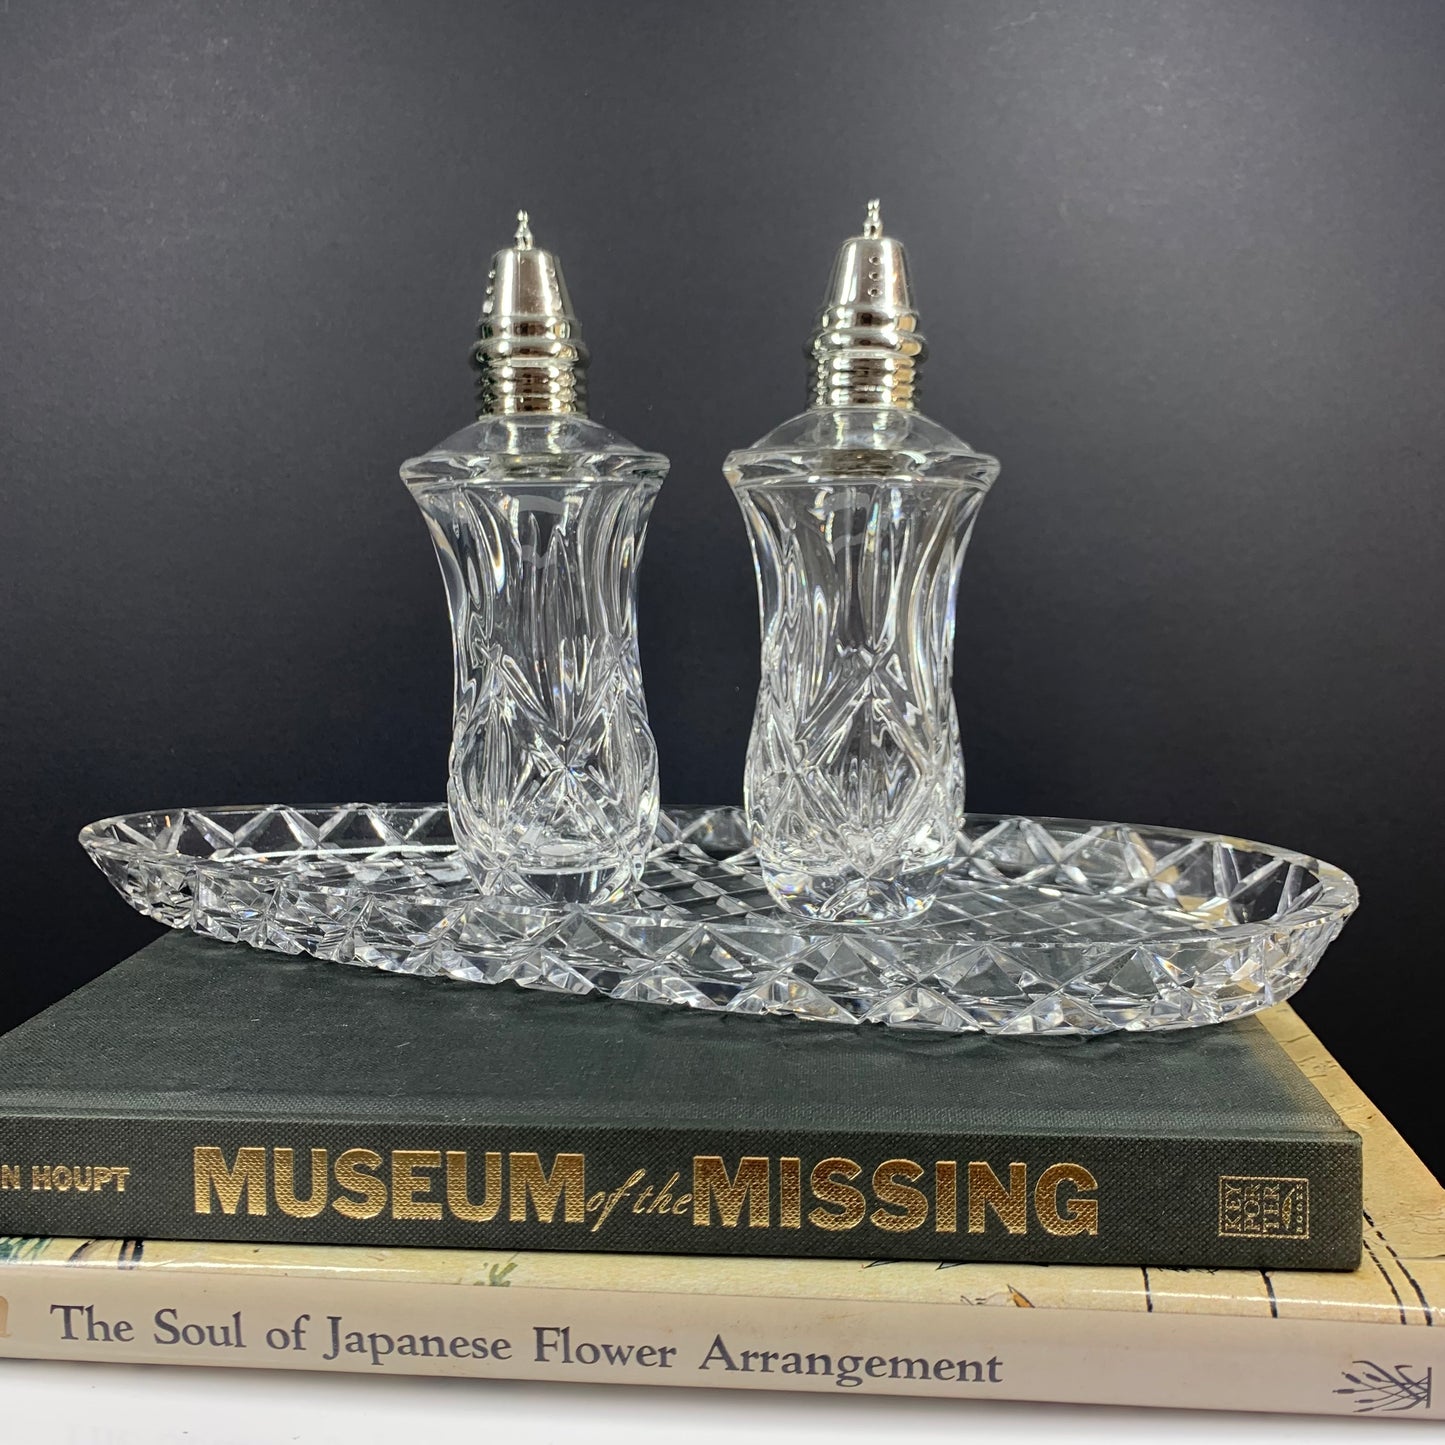 Antique Bohemian crystal salt and pepper shakers